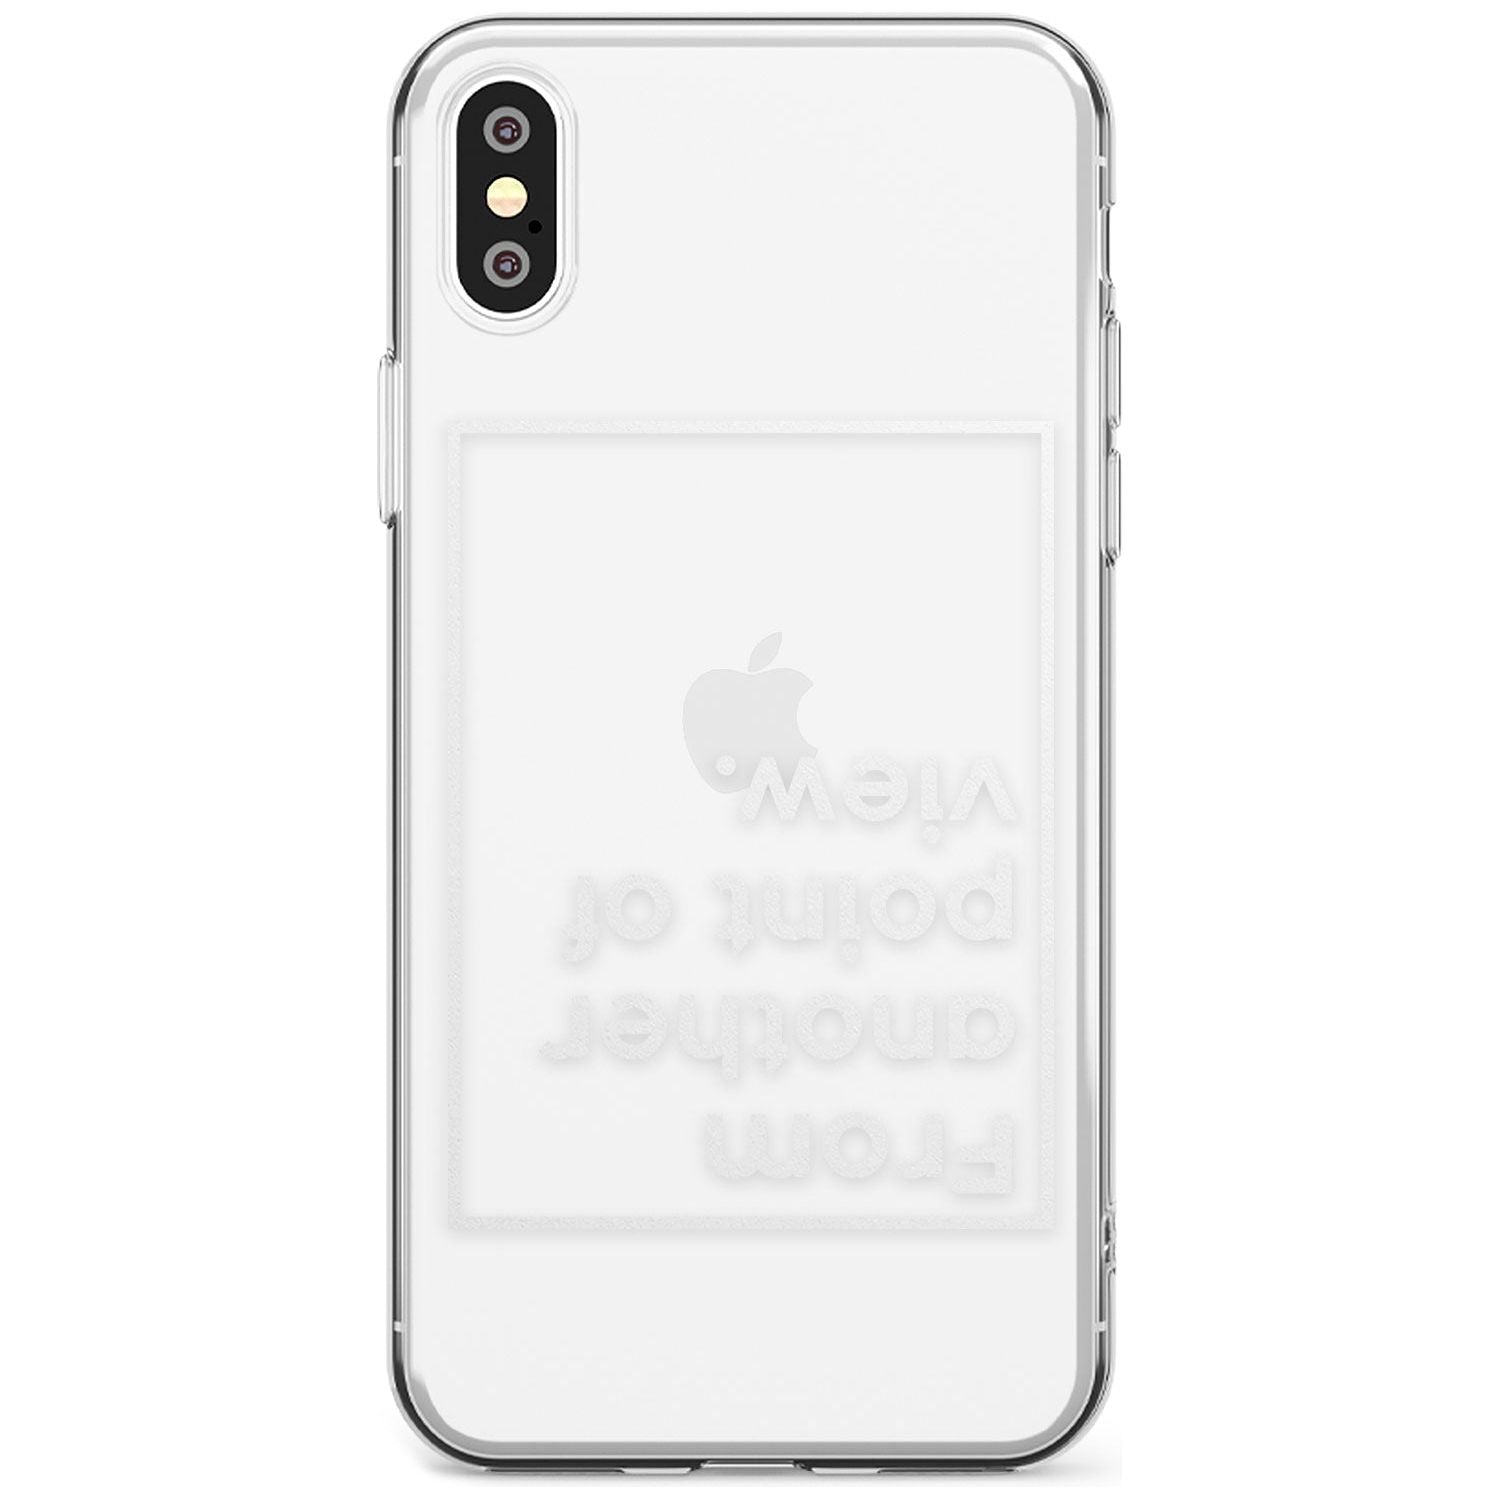 Another Point of View (White) Black Impact Phone Case for iPhone X XS Max XR